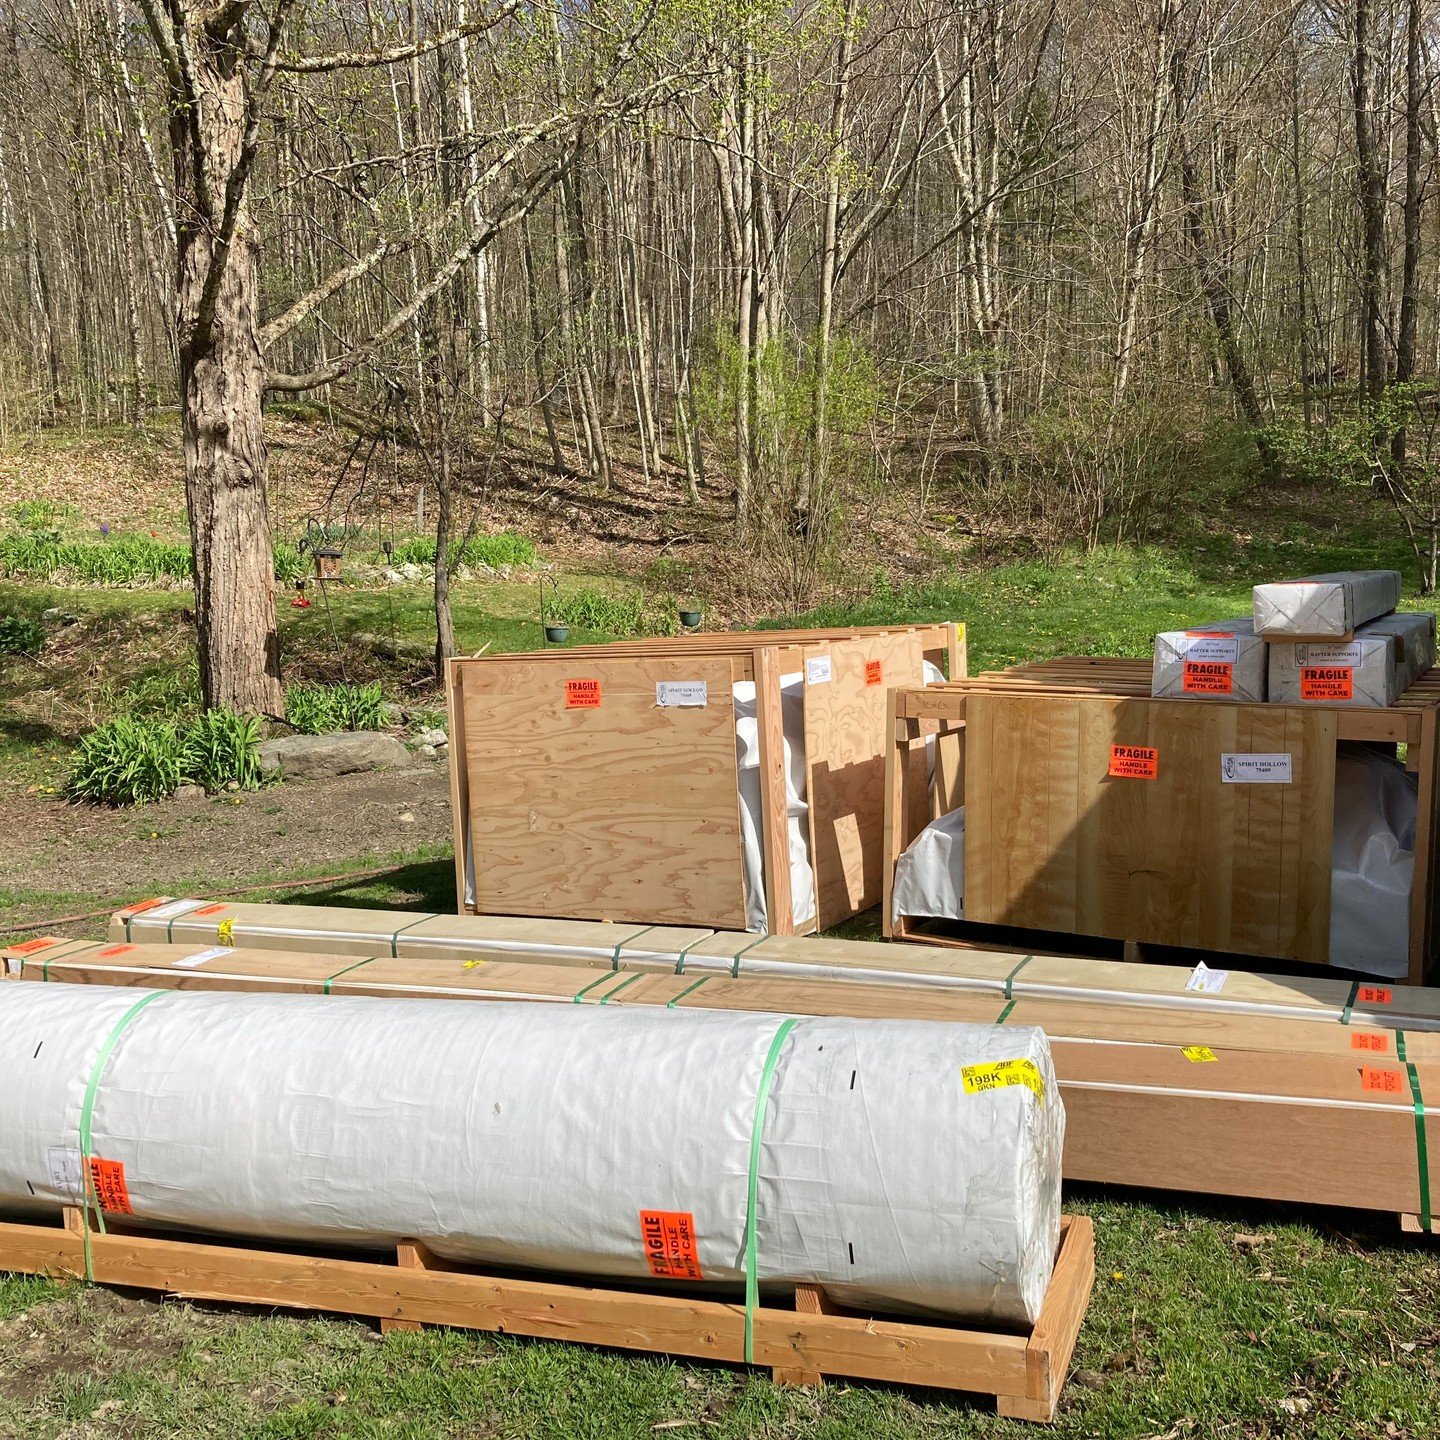 The yurt kit is here!! Thanks to my dear friend, Brian Taylor, who made three trips to Cohoes to pick it up.

The platform will be ready by next weekend for our yurt raising! We&rsquo;d love to have you join us here at Spirit Hollow Saturday, May 11 